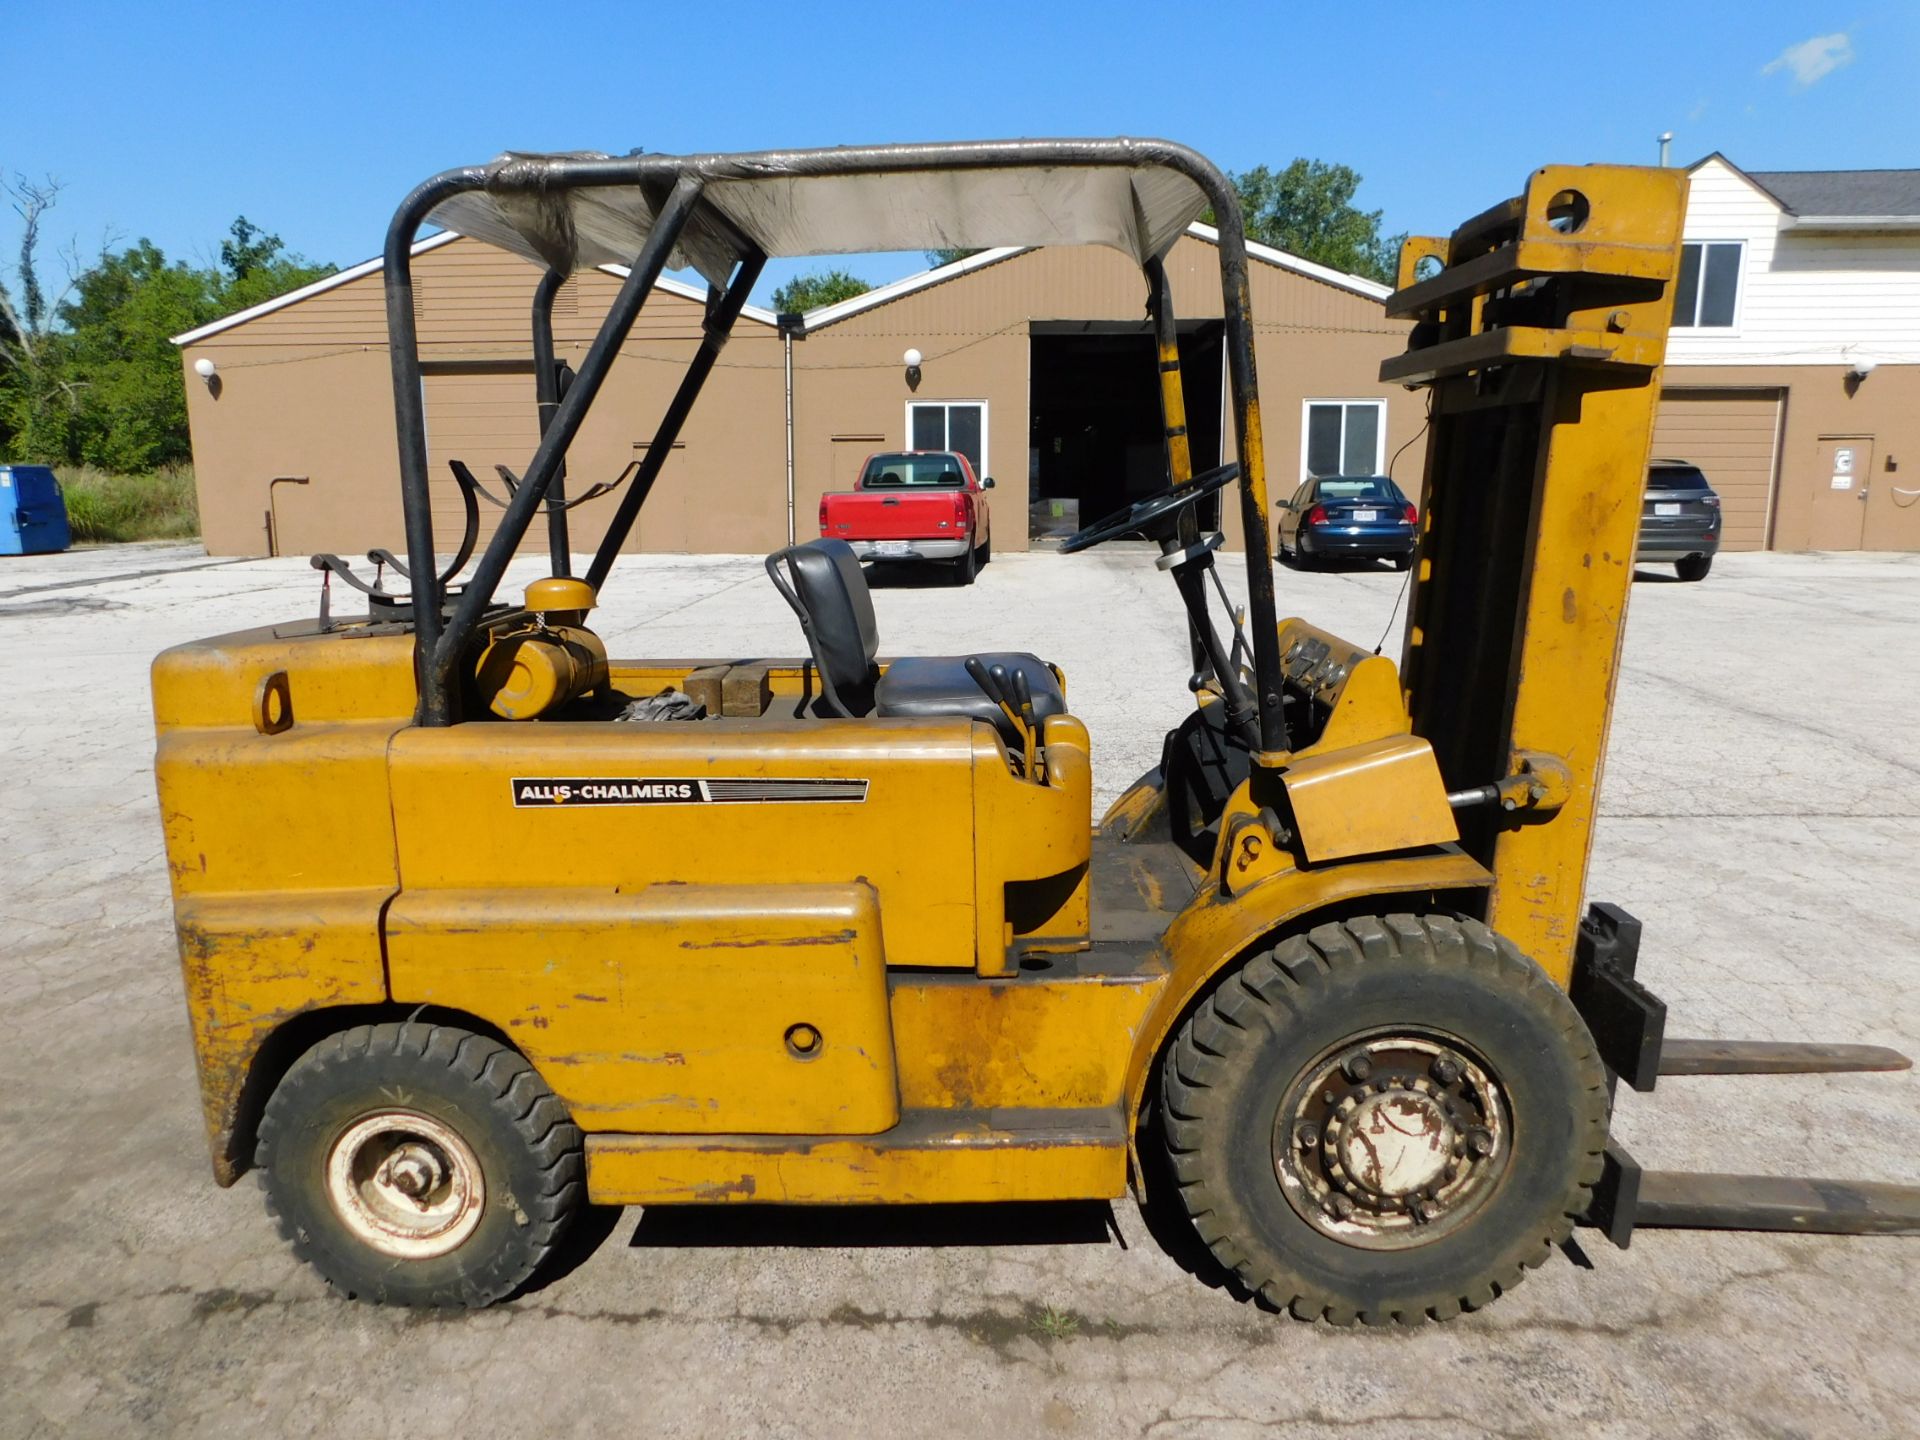 Allis Chalmers Model FP-80-24 Fork Lift, s/n 17210417, 8,000 Lb. Capacity, LP, Pneumatic Tire, Cage - Image 3 of 16